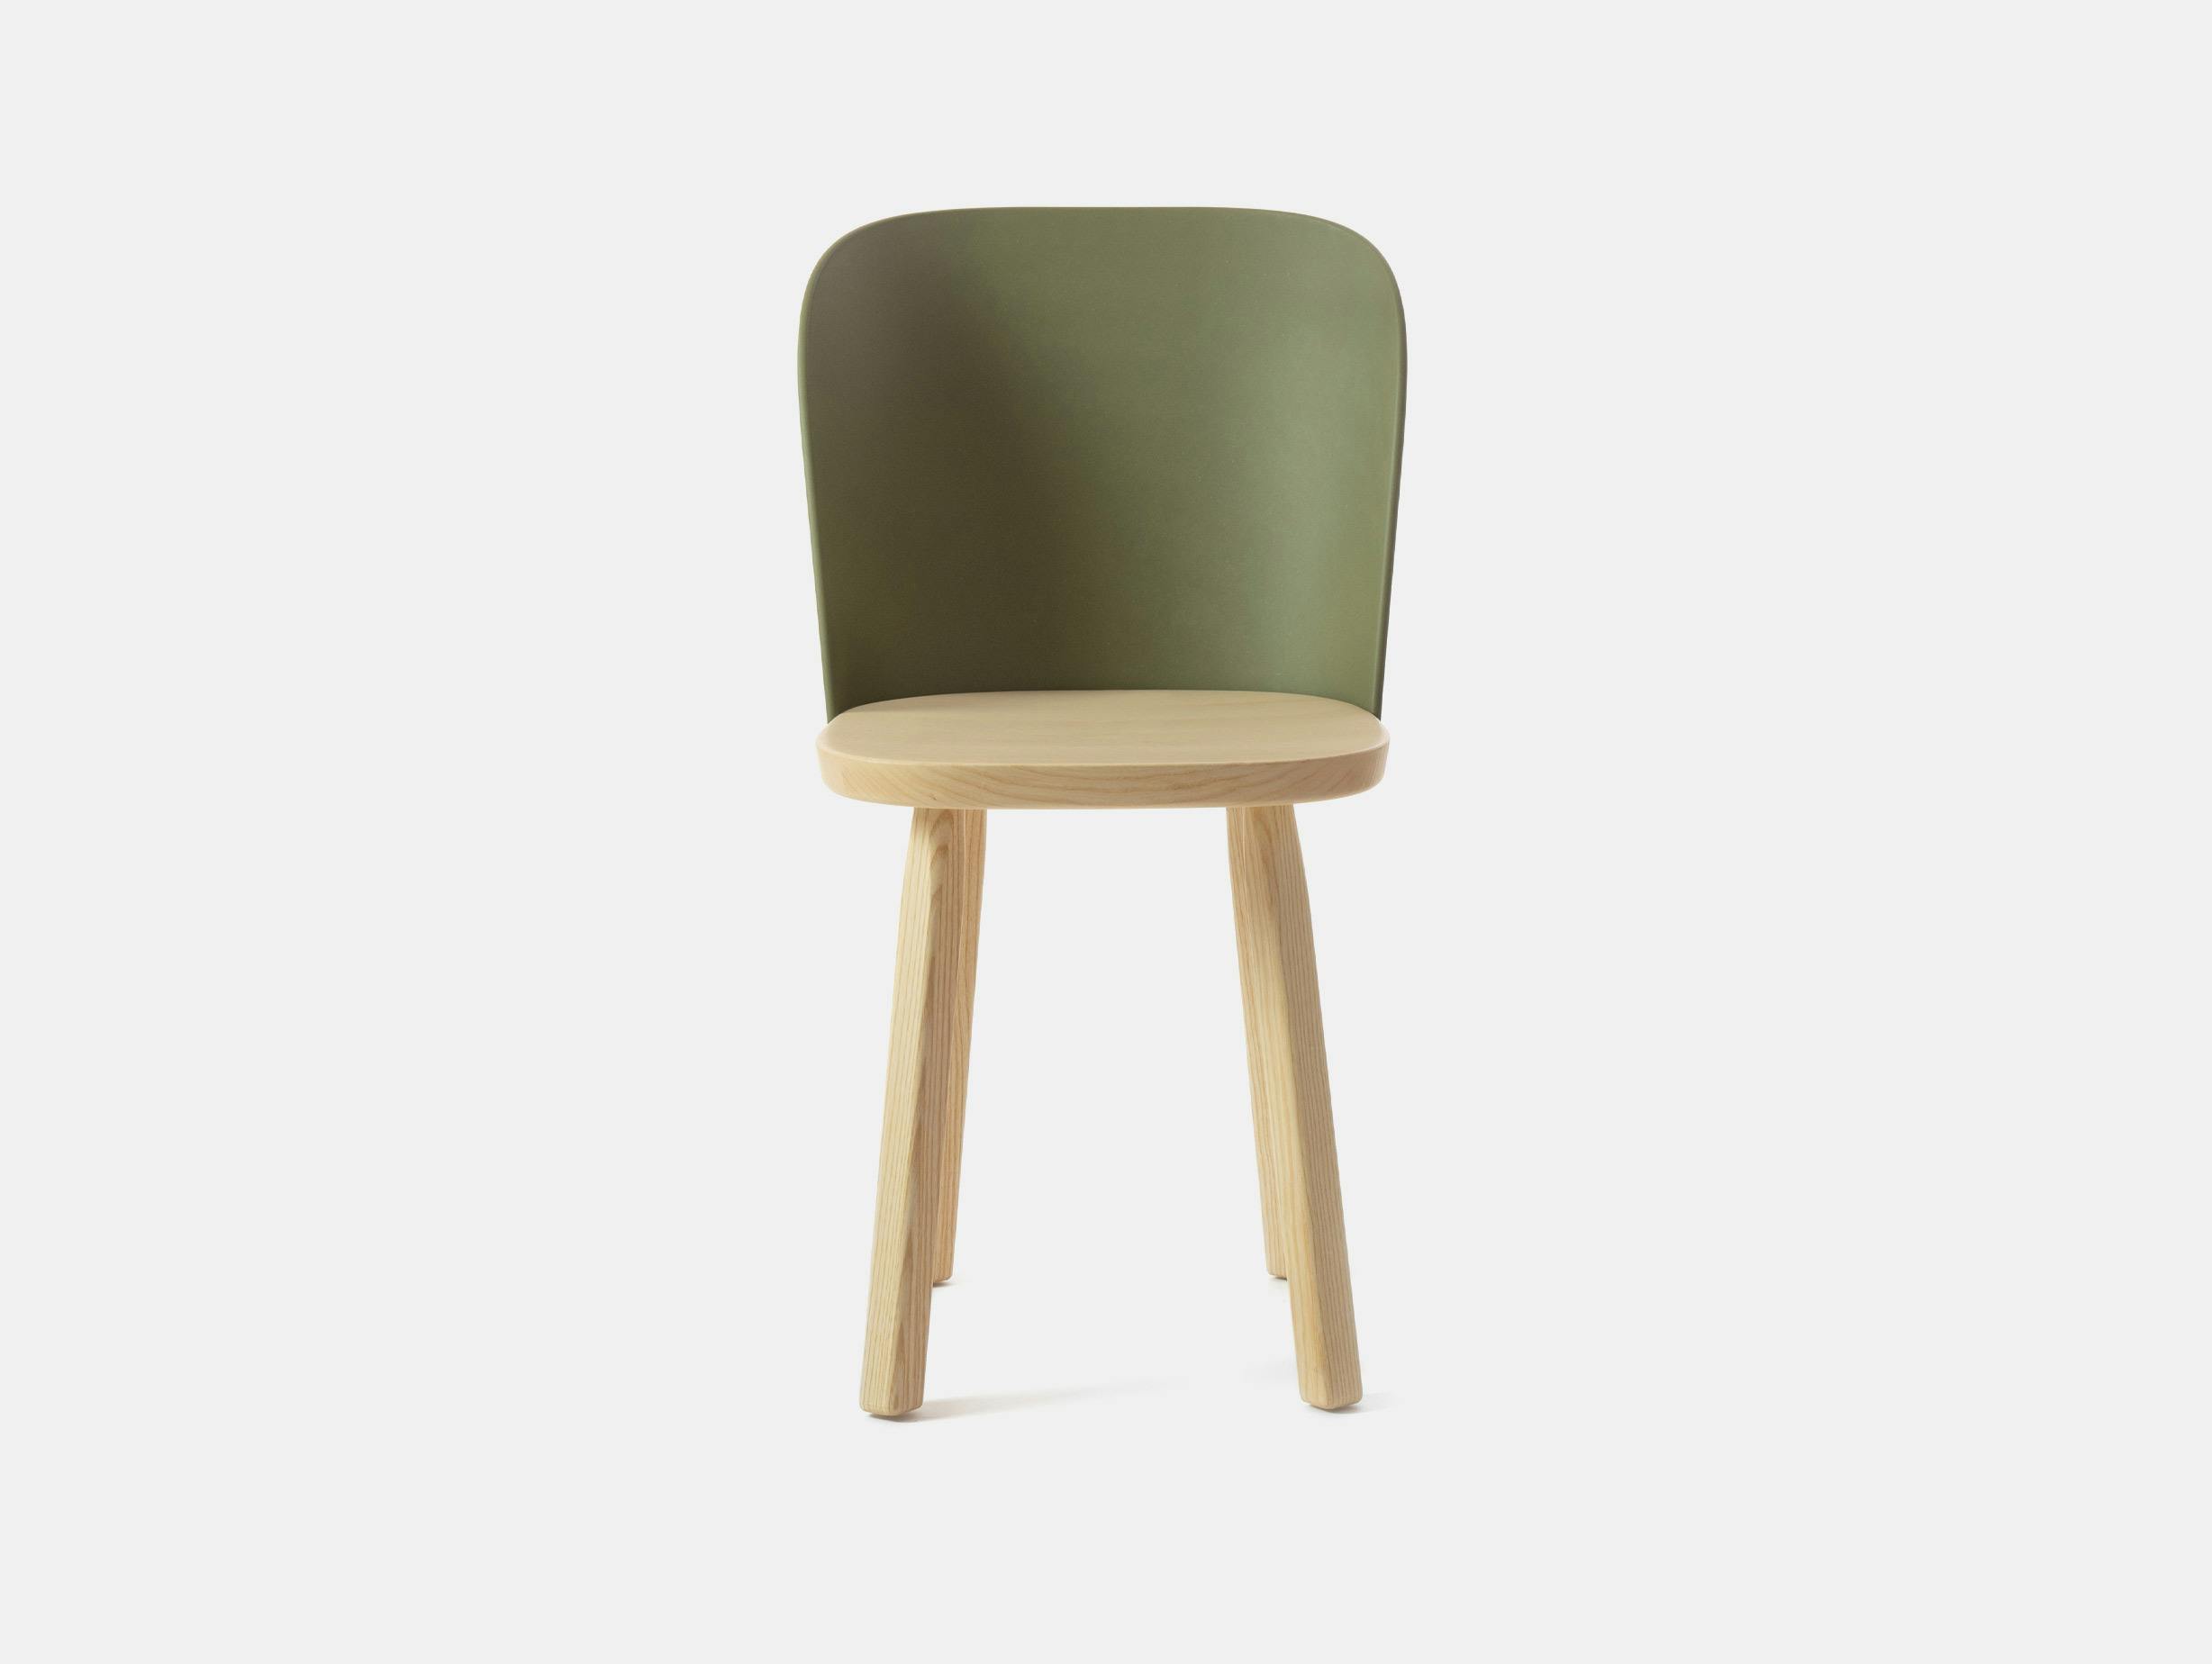 Magis edward barber jay osgerby alpina chair natural legs olive green back 1